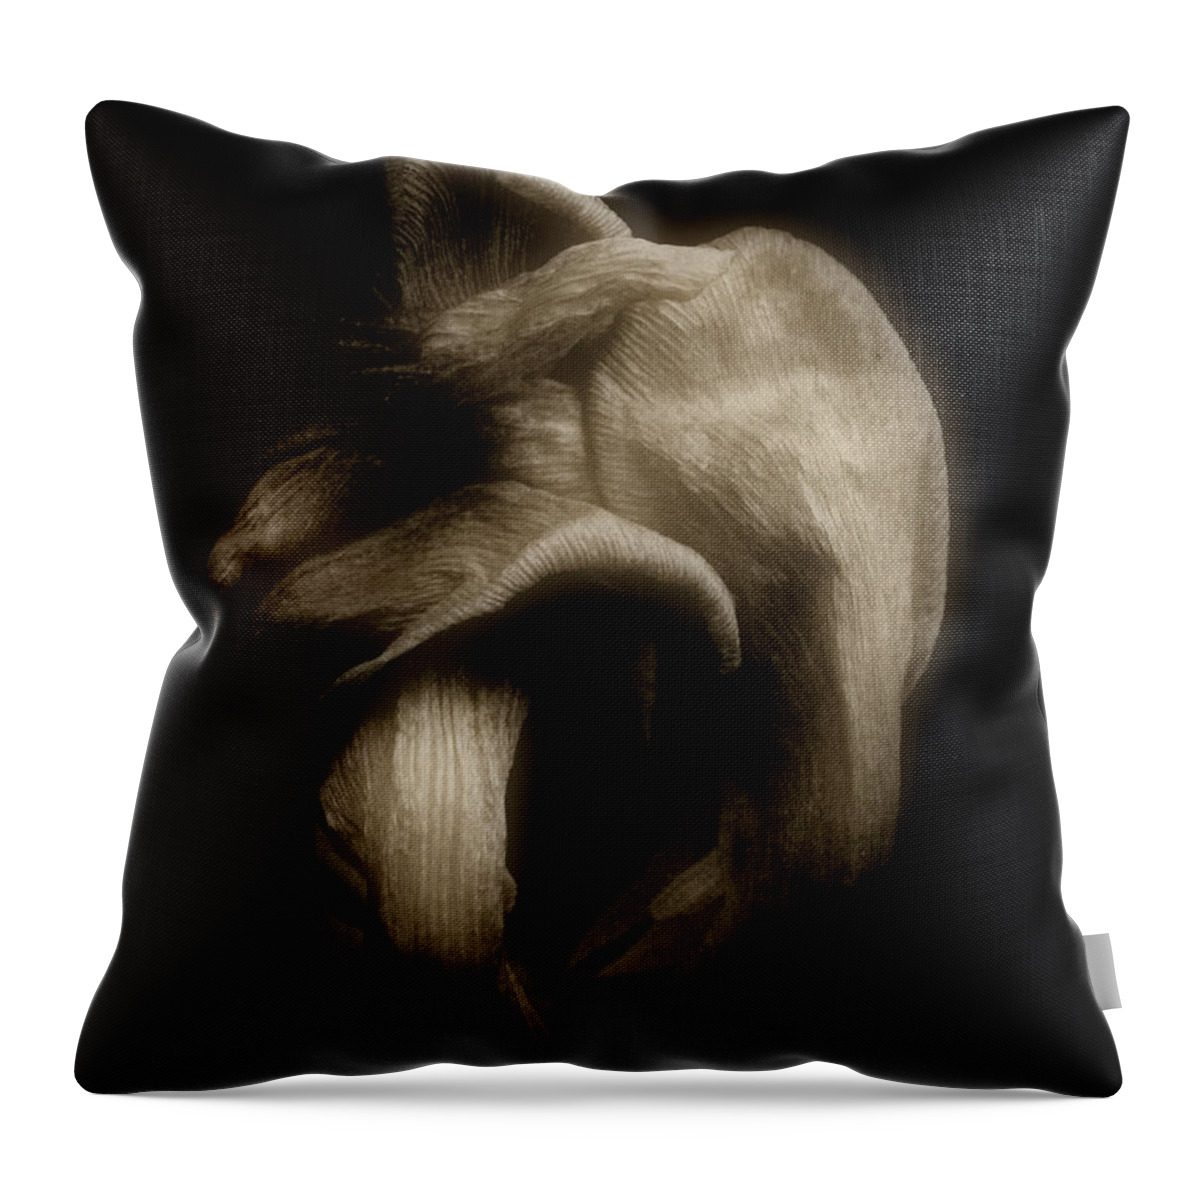 Tulip Throw Pillow featuring the photograph Knot by Cynthia Dickinson